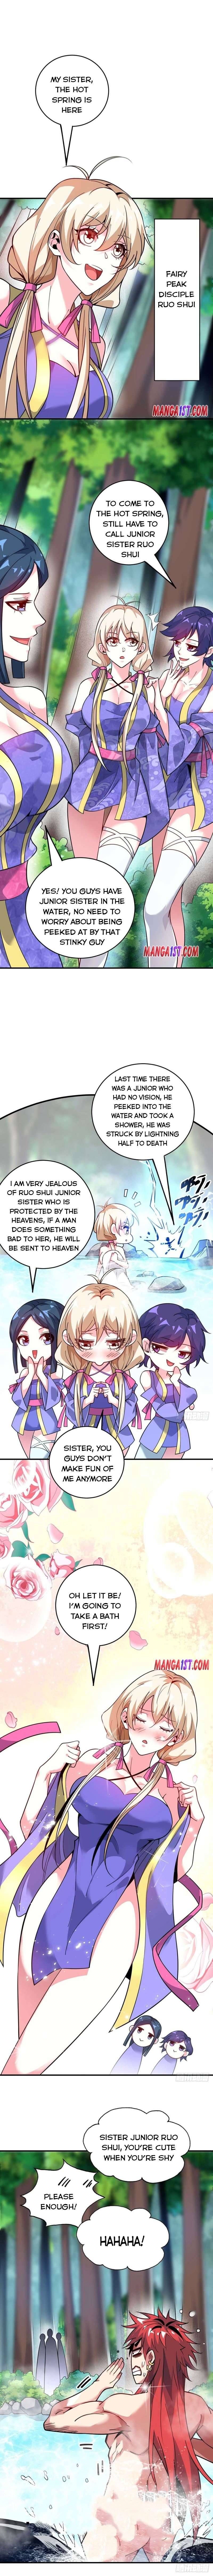 The First Son-In-Law Vanguard of All Time Chapter 122 page 3